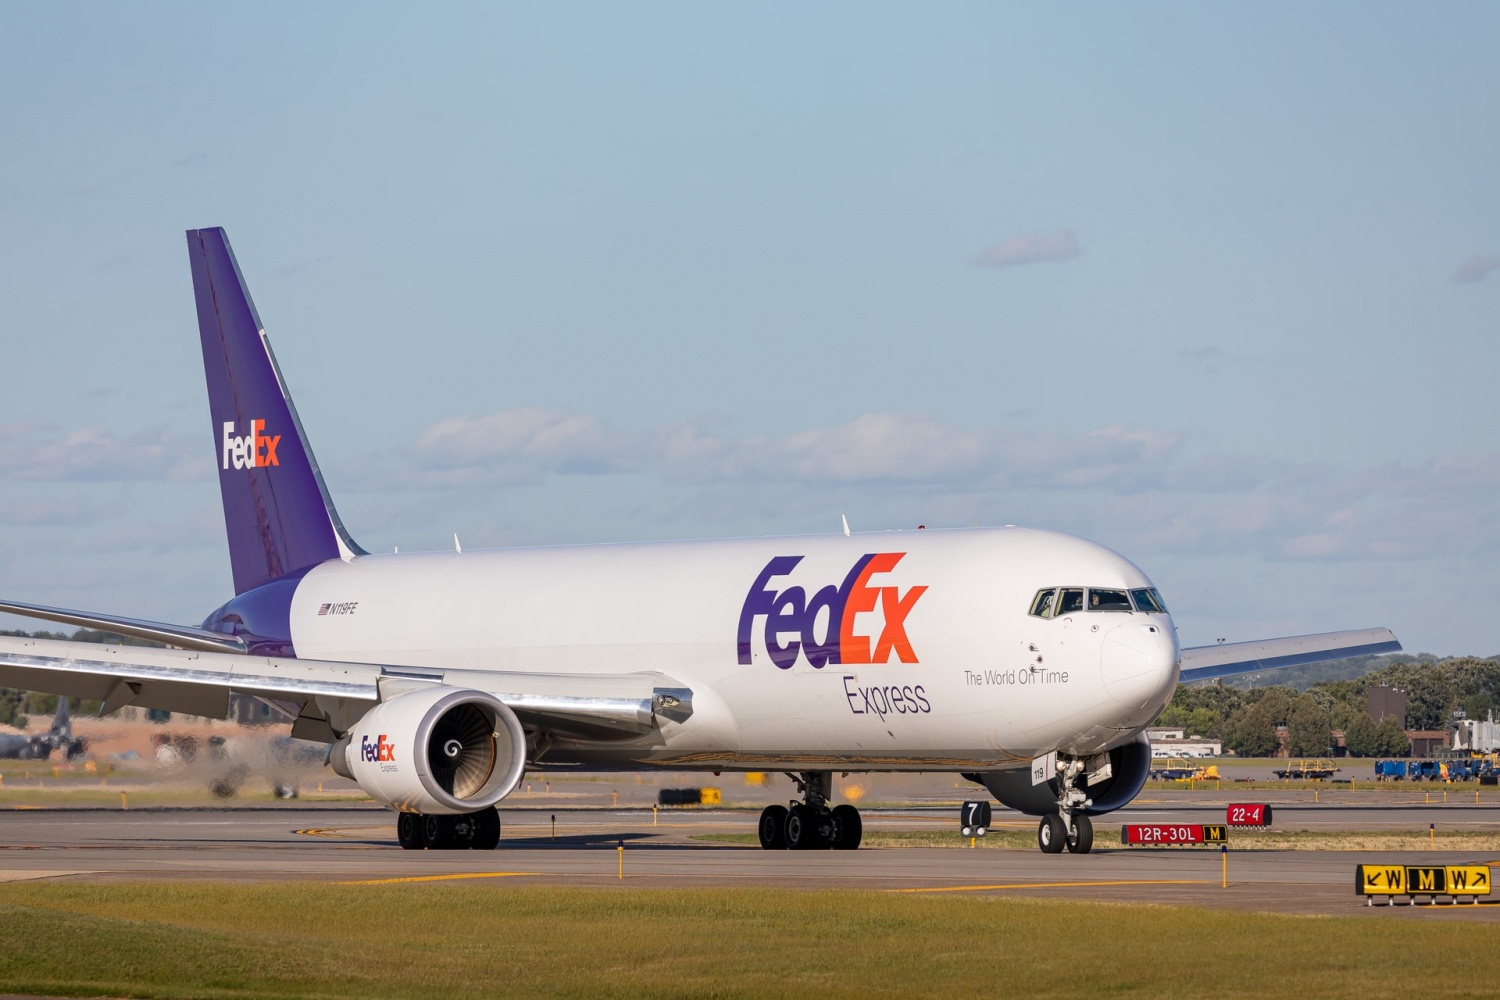 Future FedEx Cargo Planes Could Come with Anti-Missile Laser Systems | AirBus A321-200 Equipped with Defense Technology?